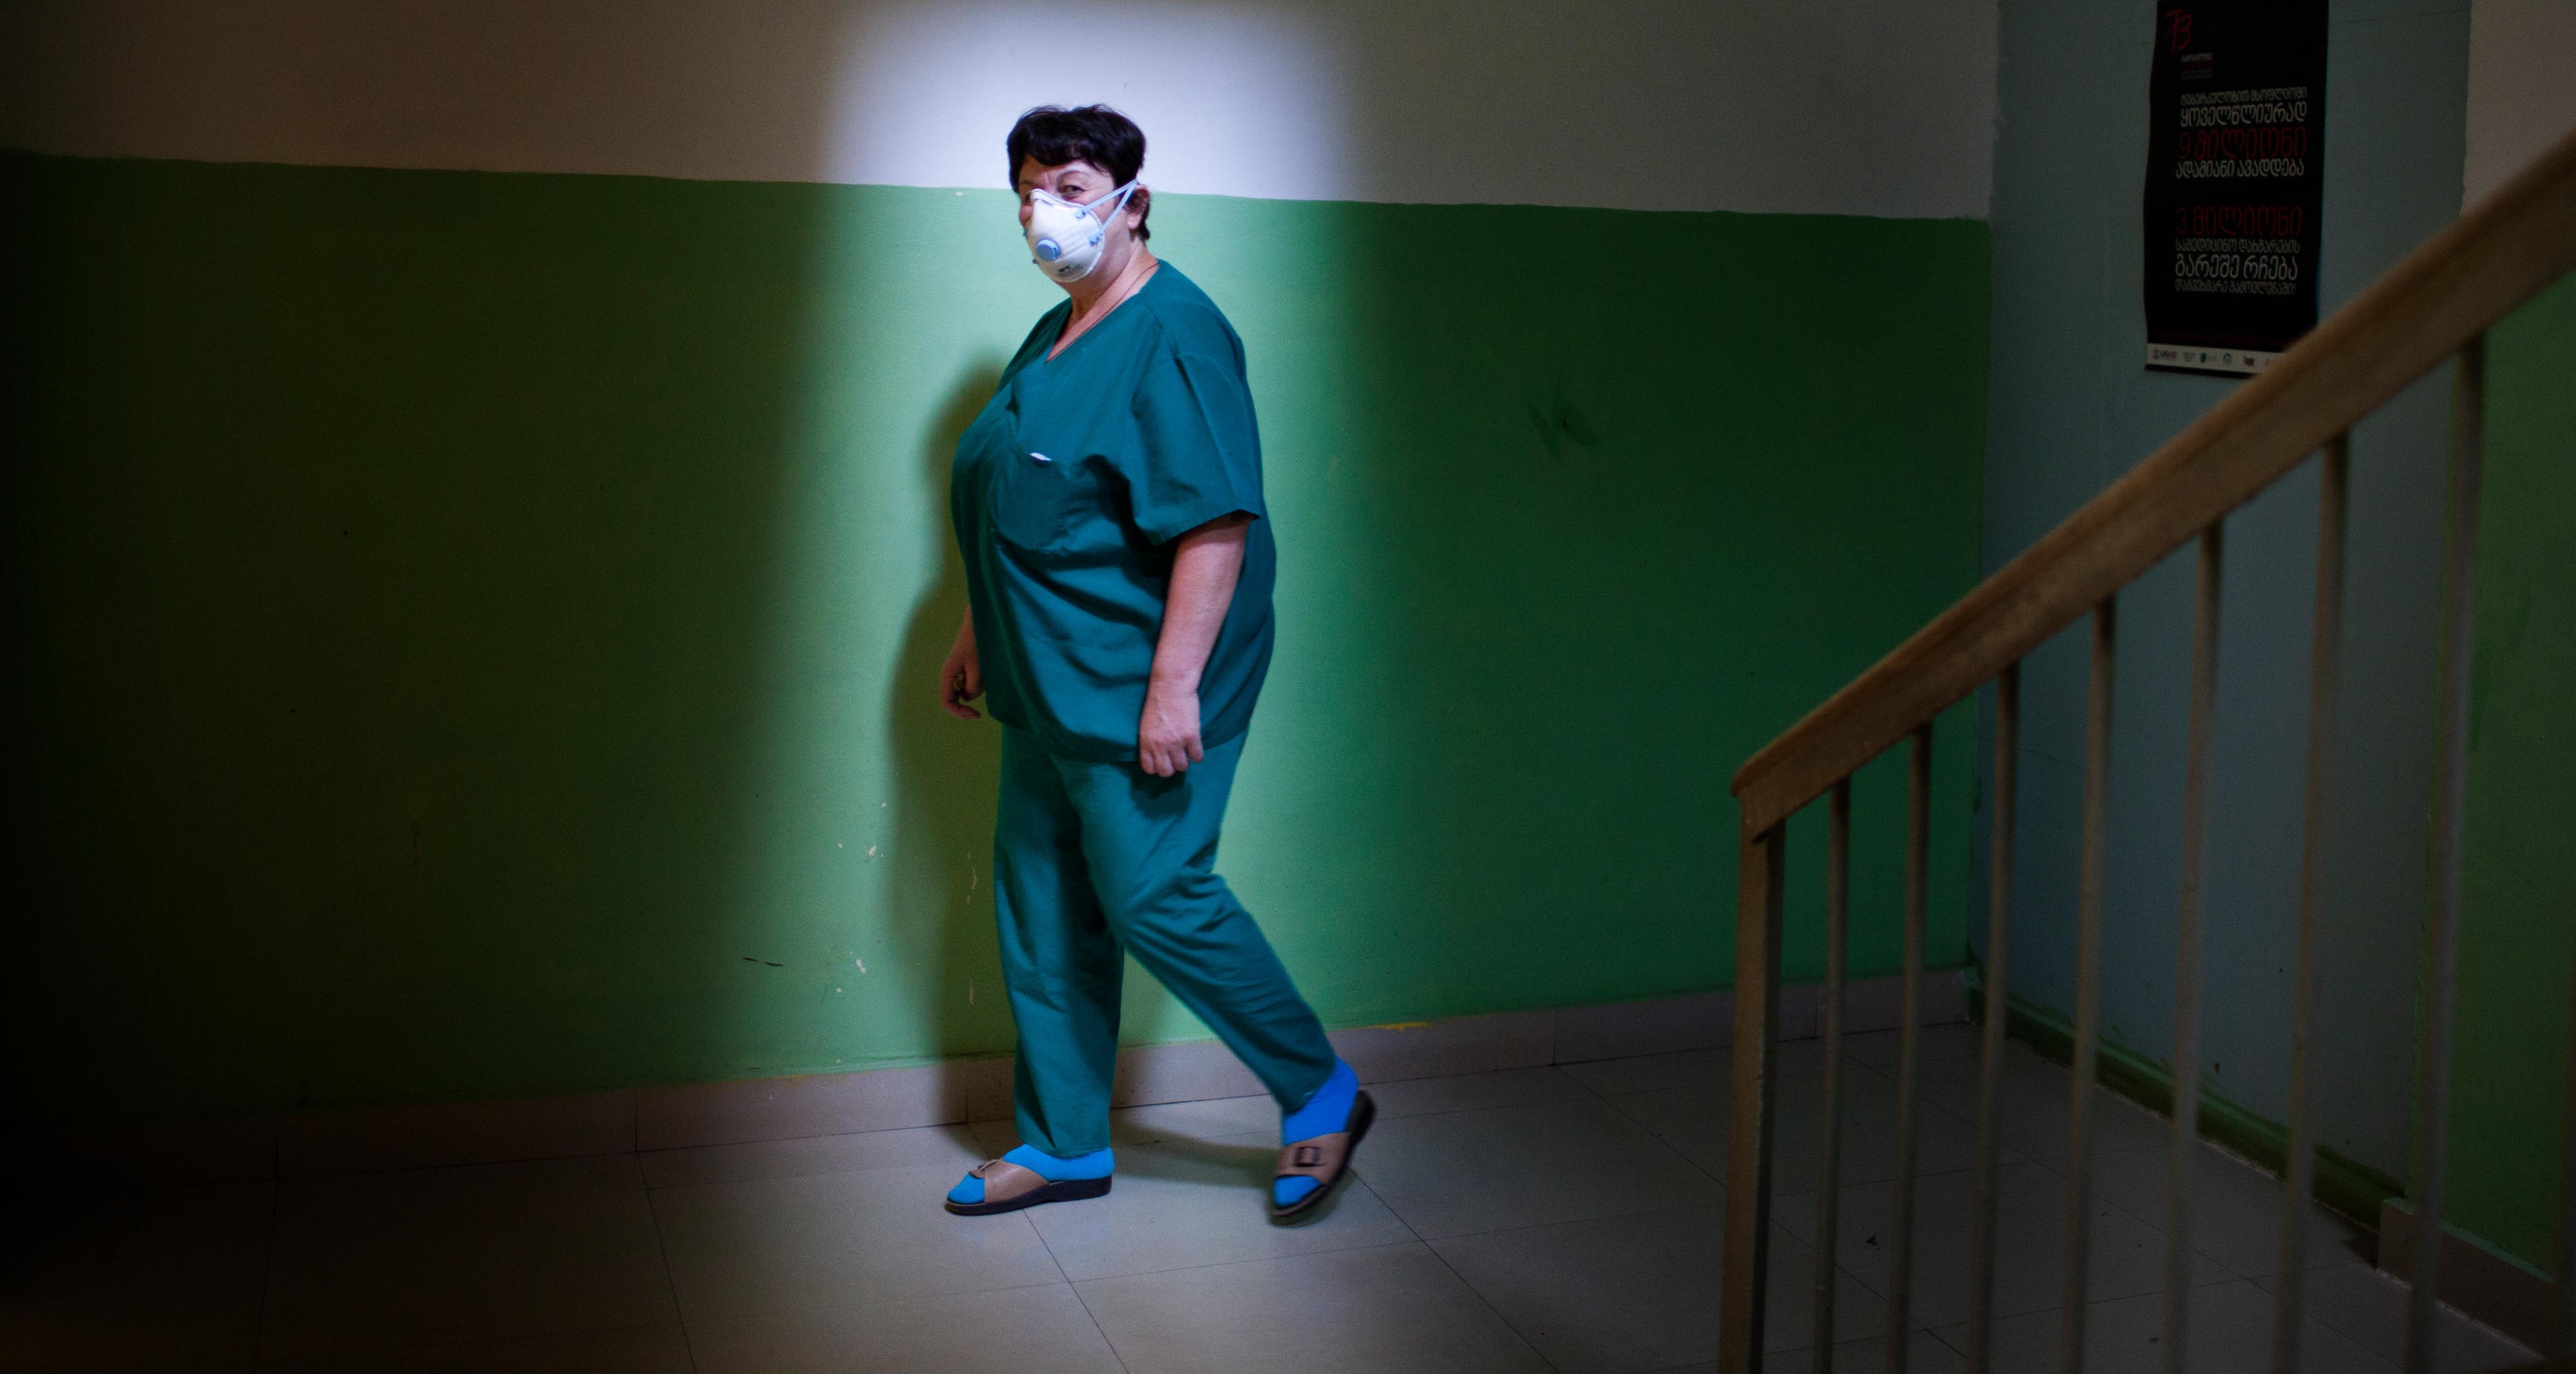 A nurse at work at Zugdidi regional TB hospital, in Georgia’s Samegrelo region, where MSF first started working in 2006.  “The question people ask me most often is, ‘aren’t you afraid of working here?’ I tell them, ‘of course not.’ And I give them more information about TB.”